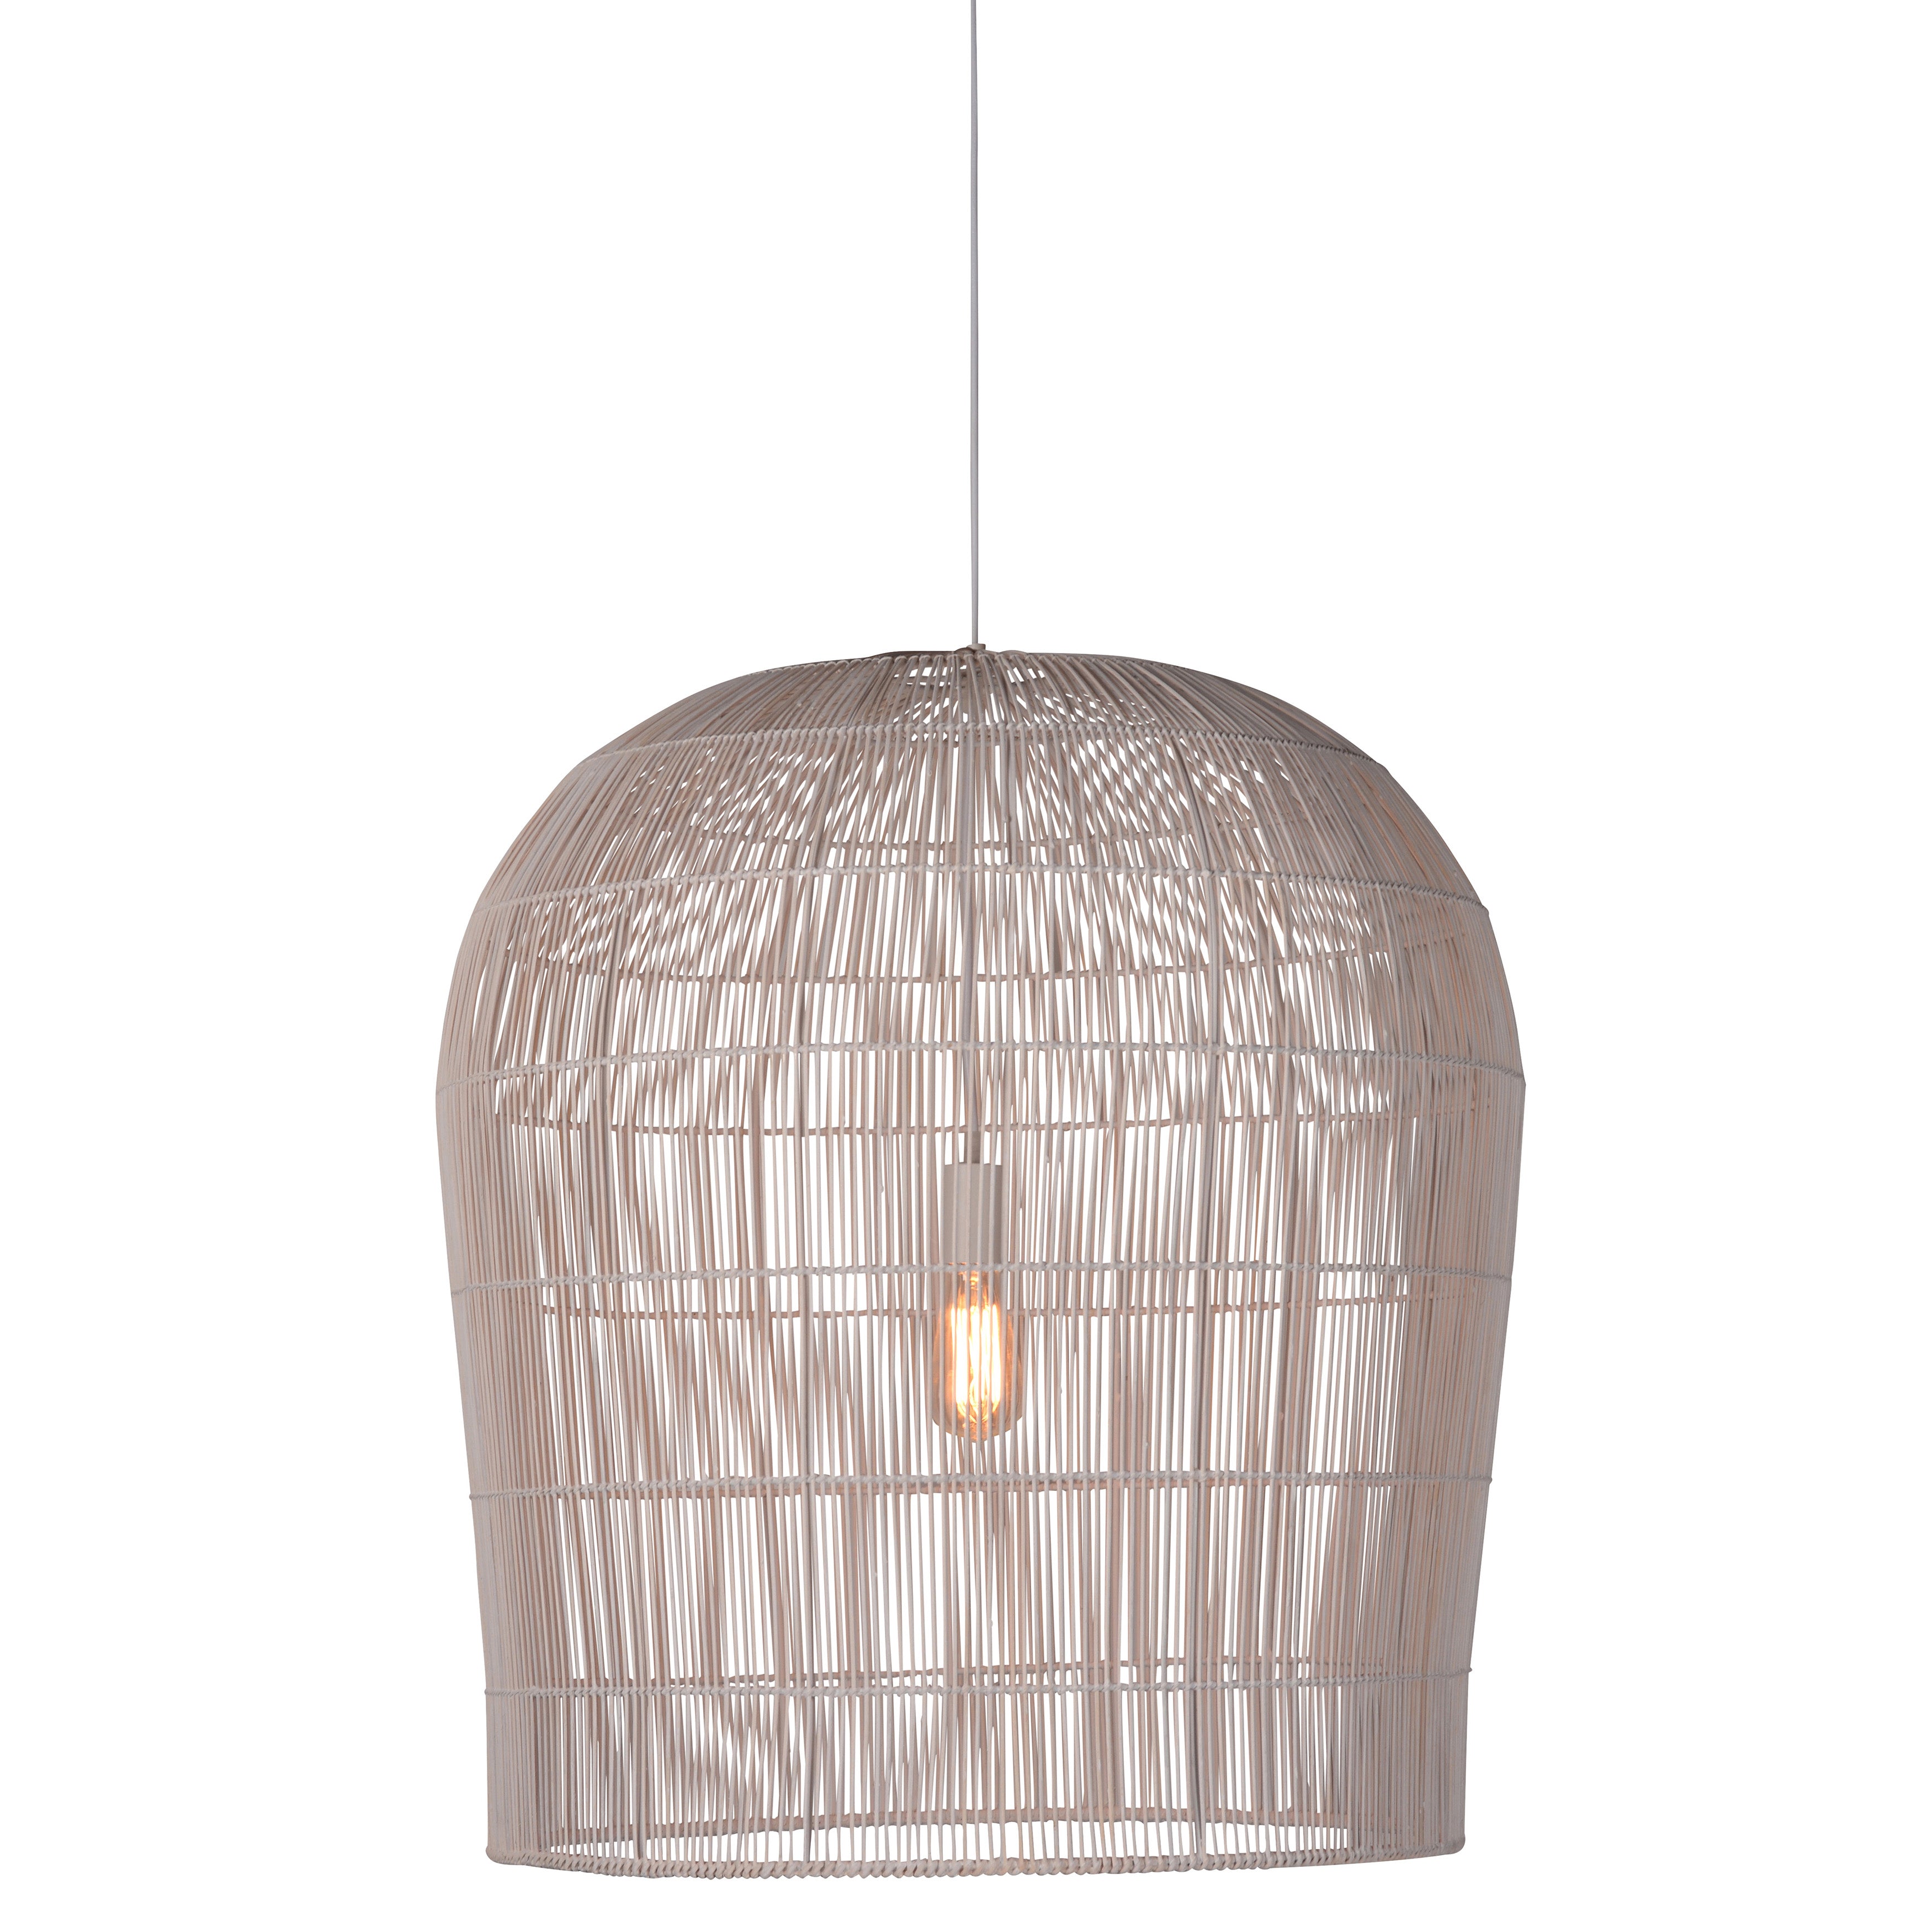 Made from natural rattan, this pendant light adds inviting style and softly diffused ambiance to any room. Remarkably versatile with its cream finish, it works well grouped above a dining table, on its own in a reading nook, or anywhere you want a relaxed touch. The perfect option for a warm and relaxed ambiance.Depth : 28 in Amethyst Home provides interior design, new home construction design consulting, vintage area rugs, and lighting in the Calabasas metro area.